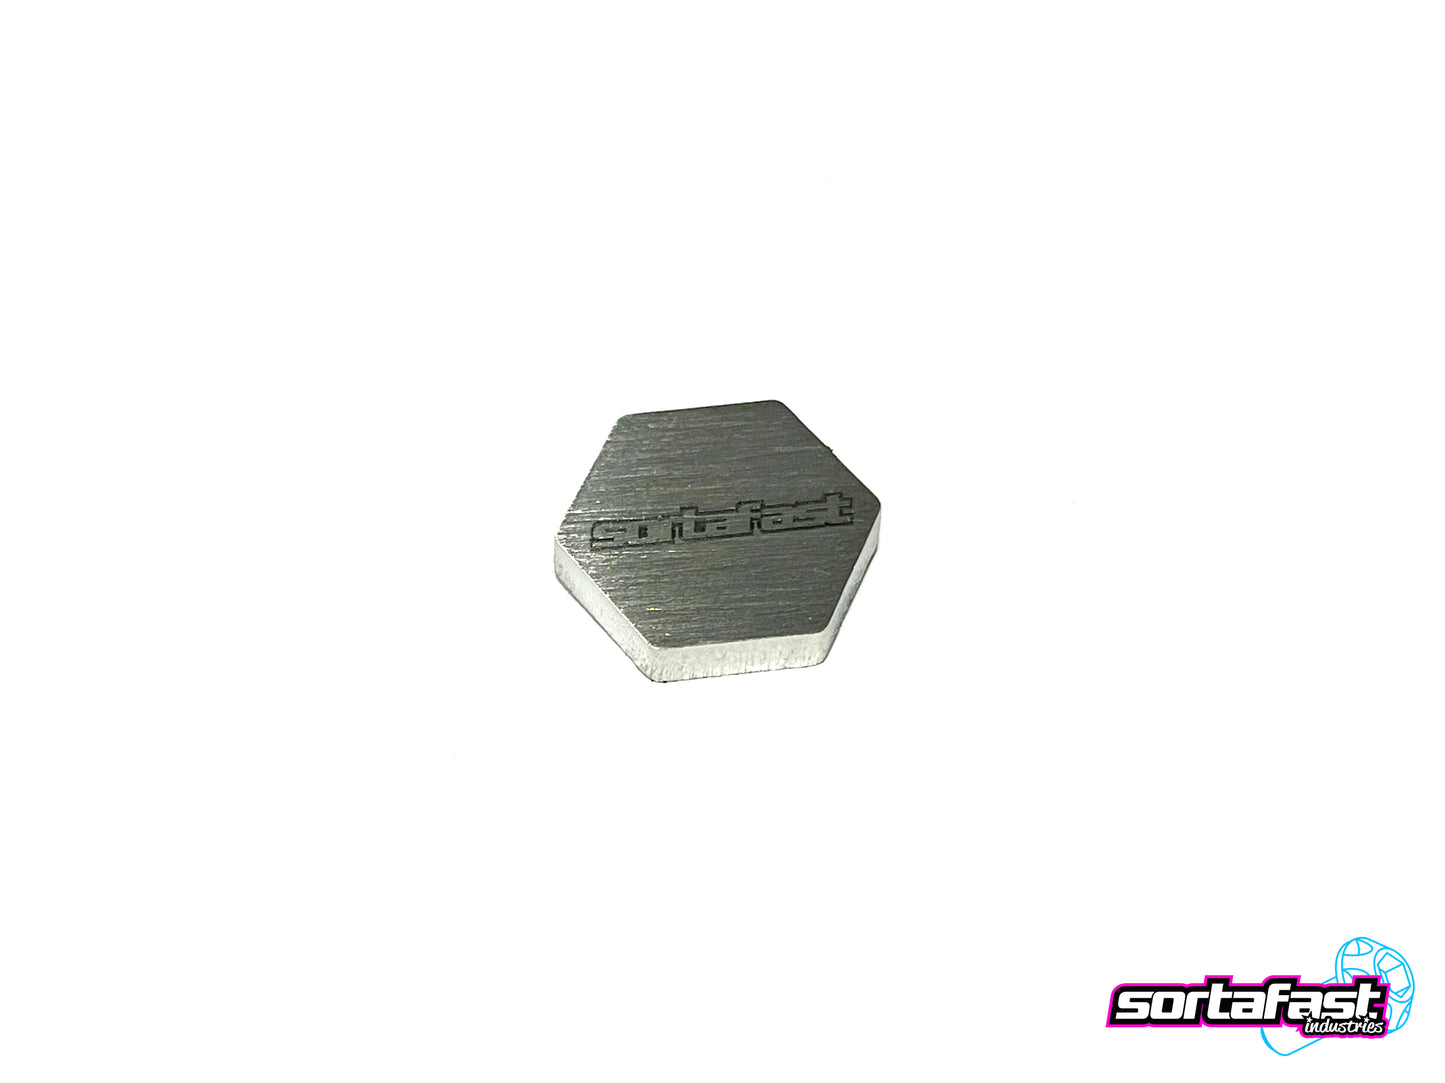 Sortafast Stainless Steel Chassis Weights - 4.5g